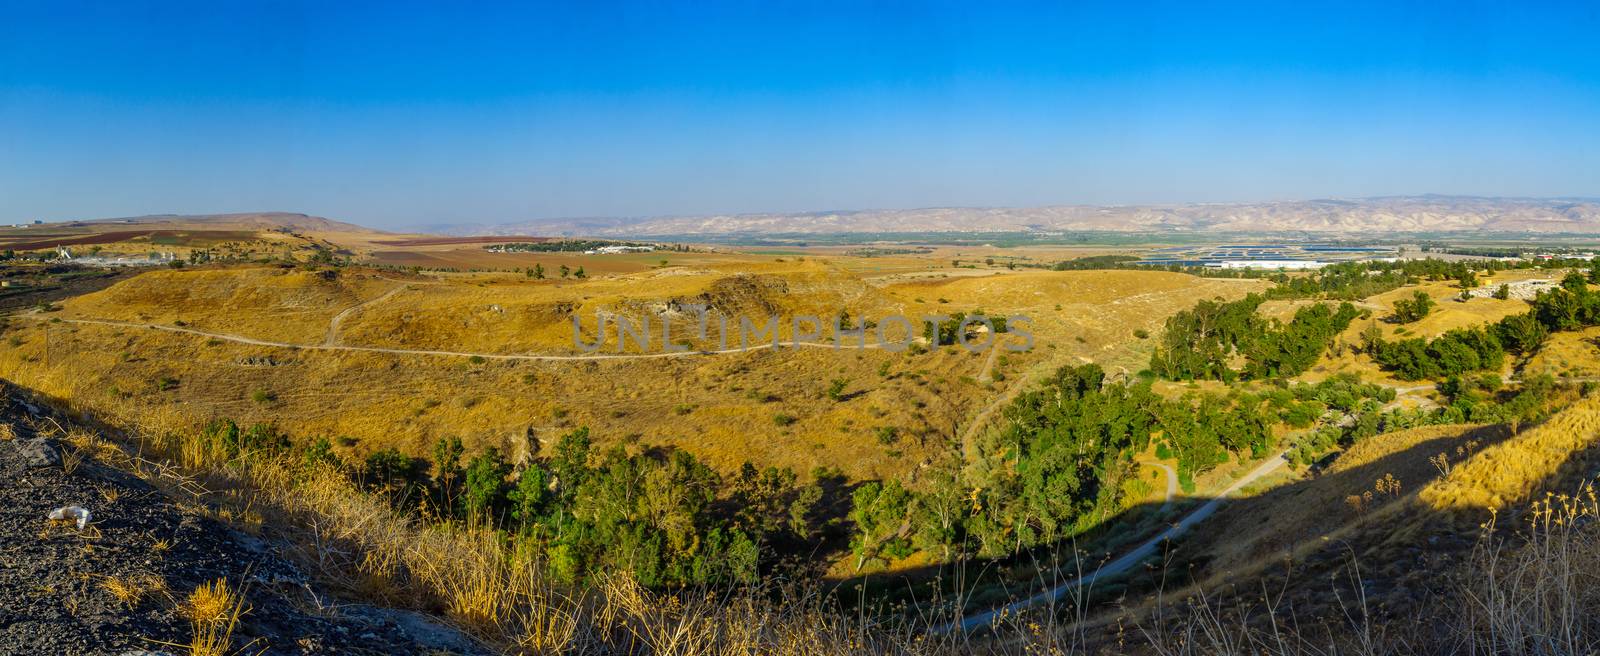 Panorama of the Jordan River valley, and Valley of Springs by RnDmS